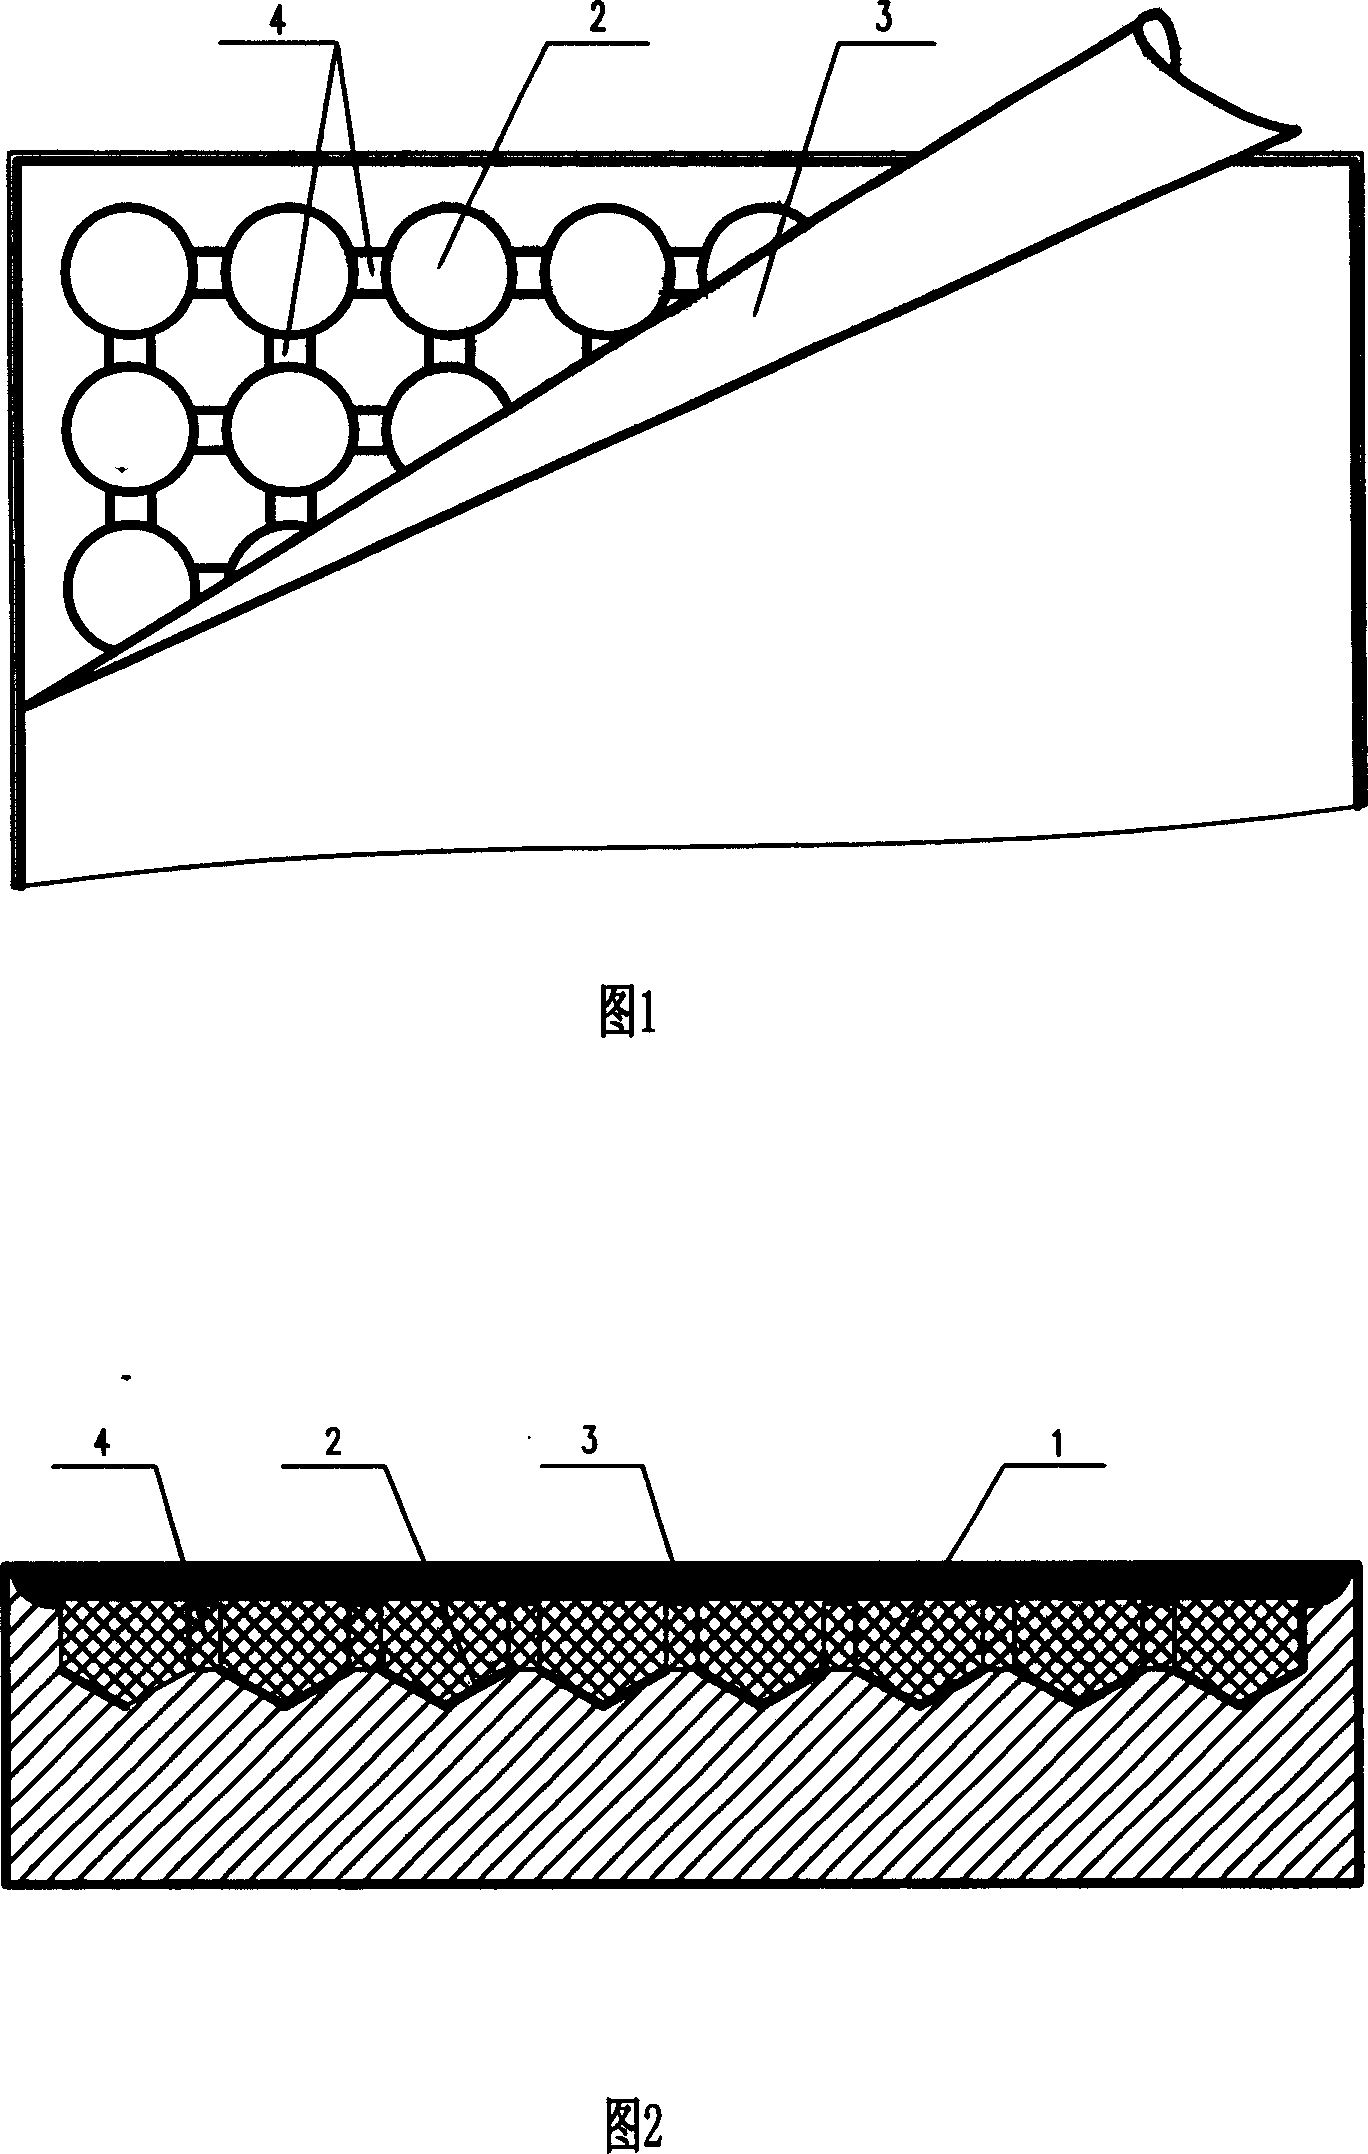 Material for substituting hydraulic oil in use for isostatic pressing die, and preparation method